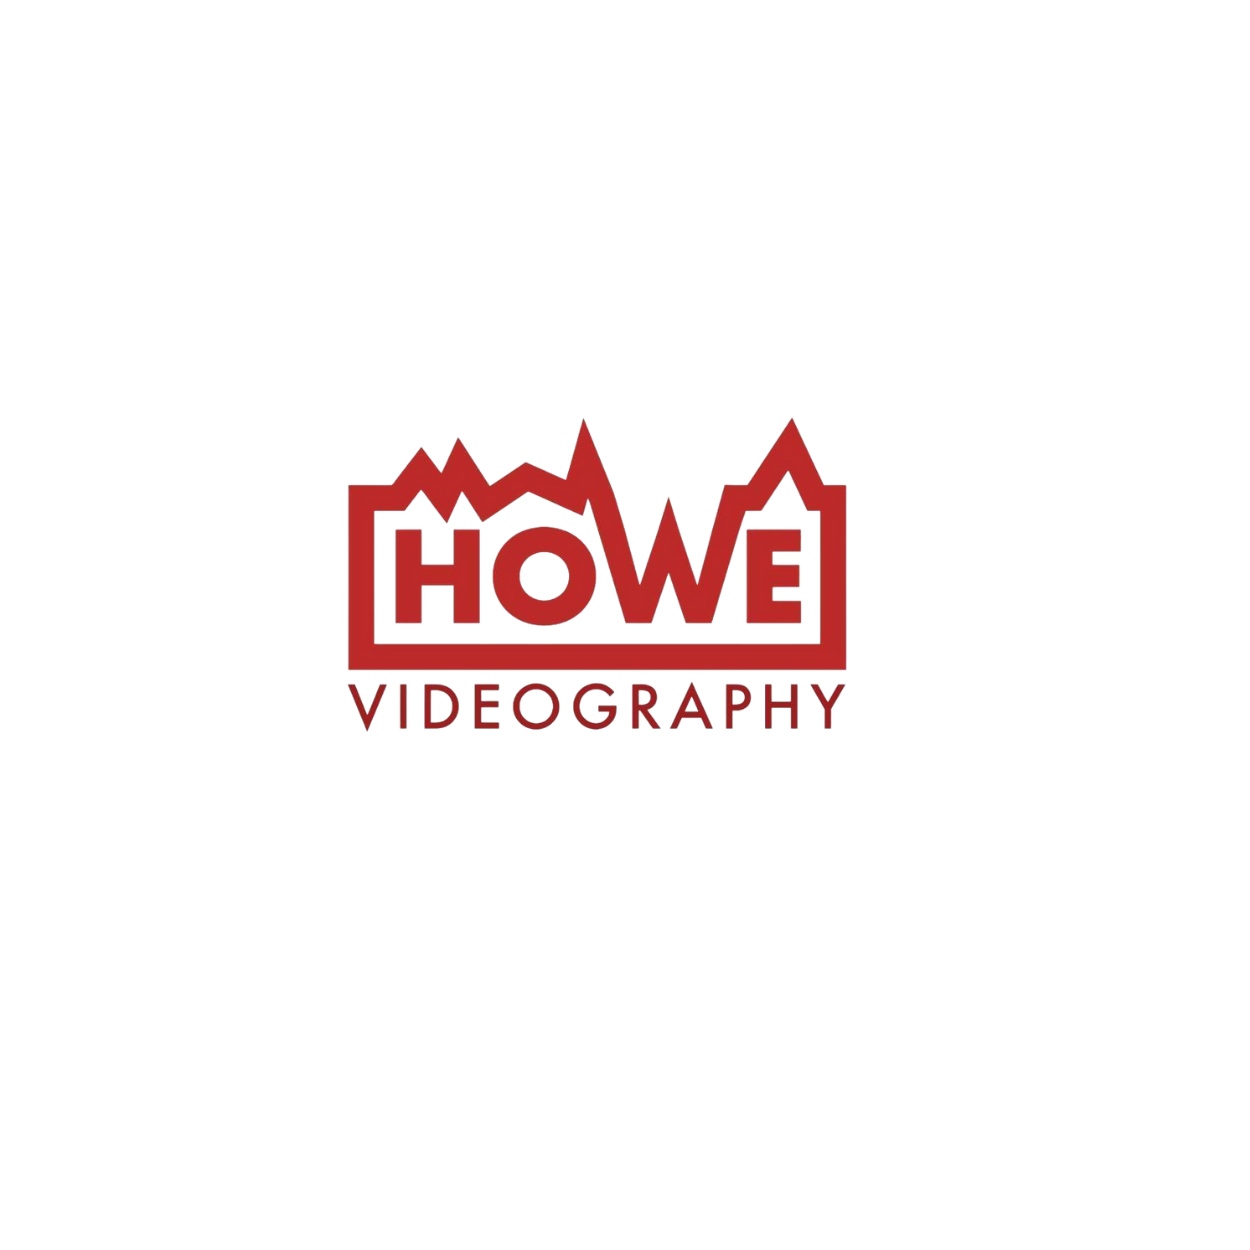 Howevideography